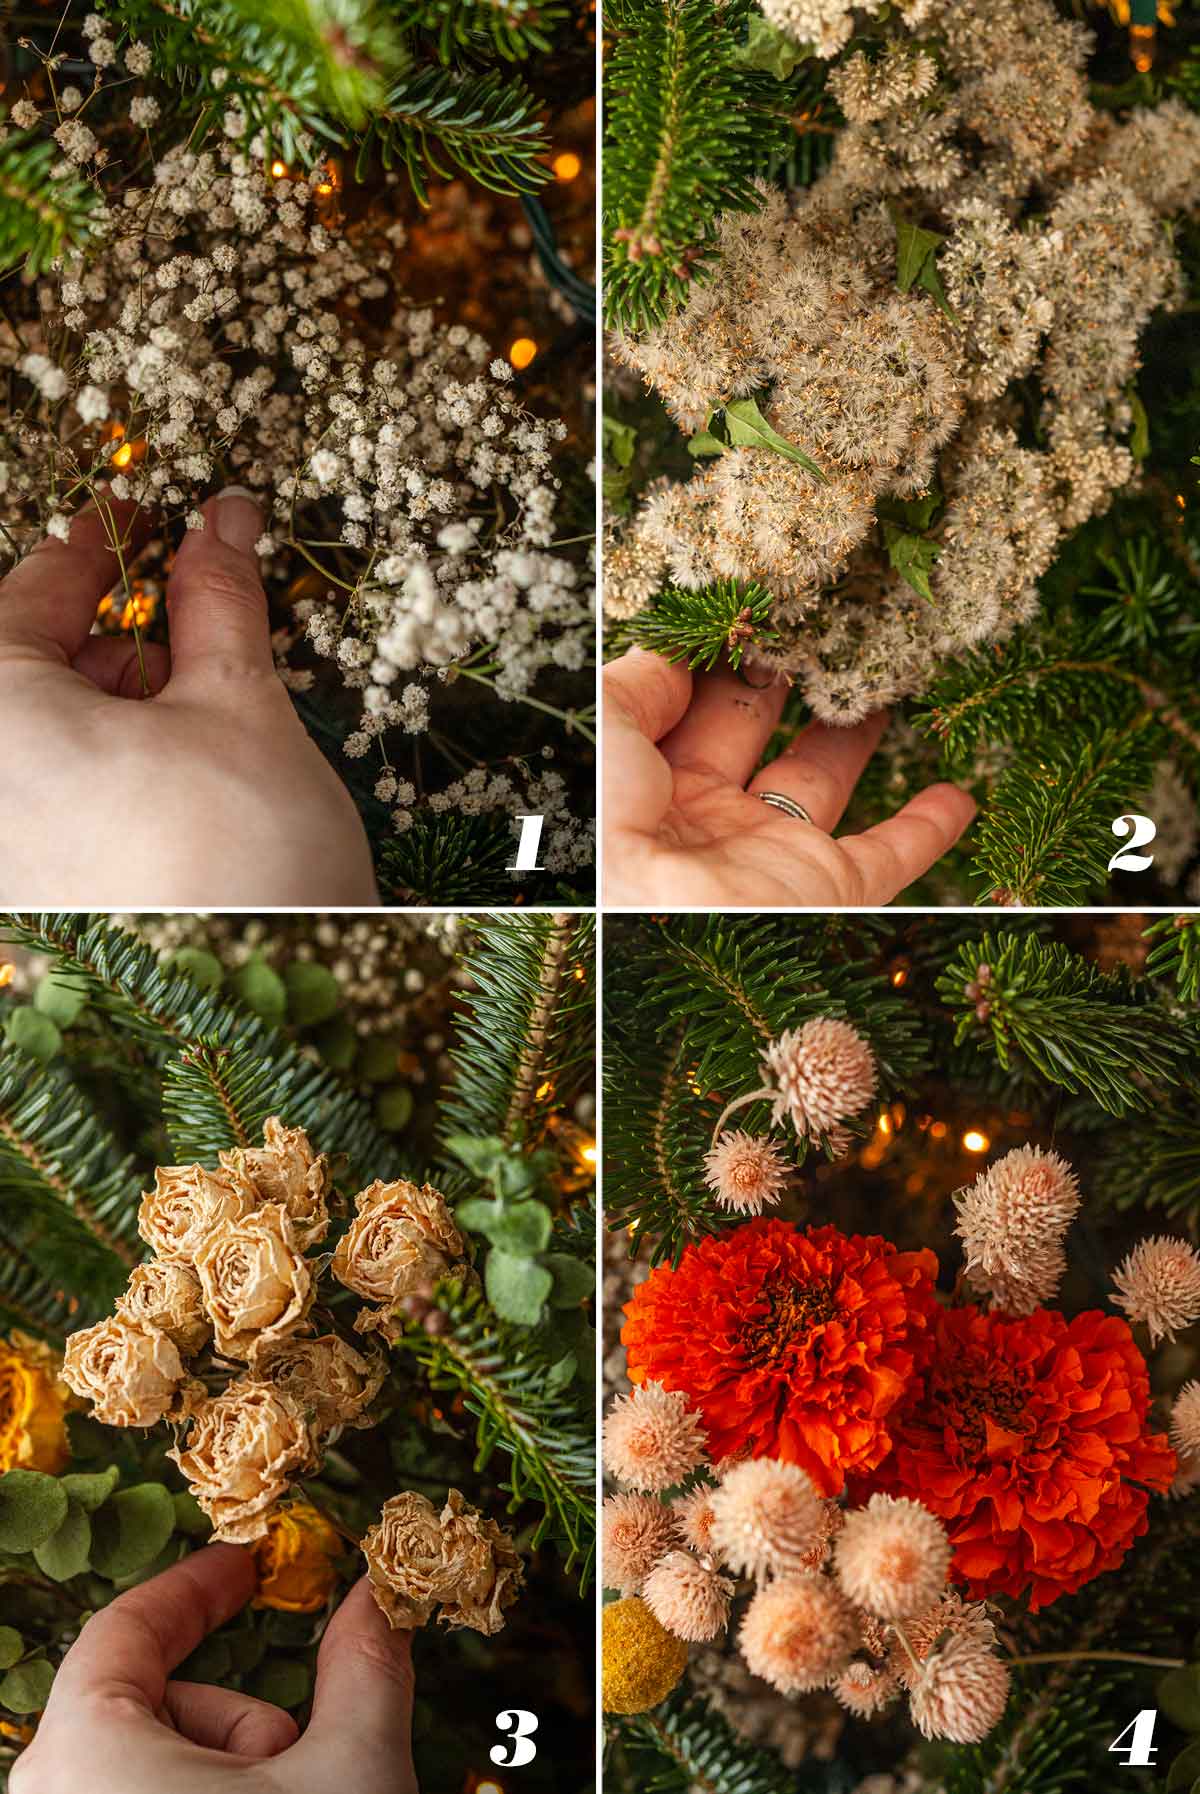 A collage of 4 numbered images showing how to decorate a Christmas tree with roses and marigolds.